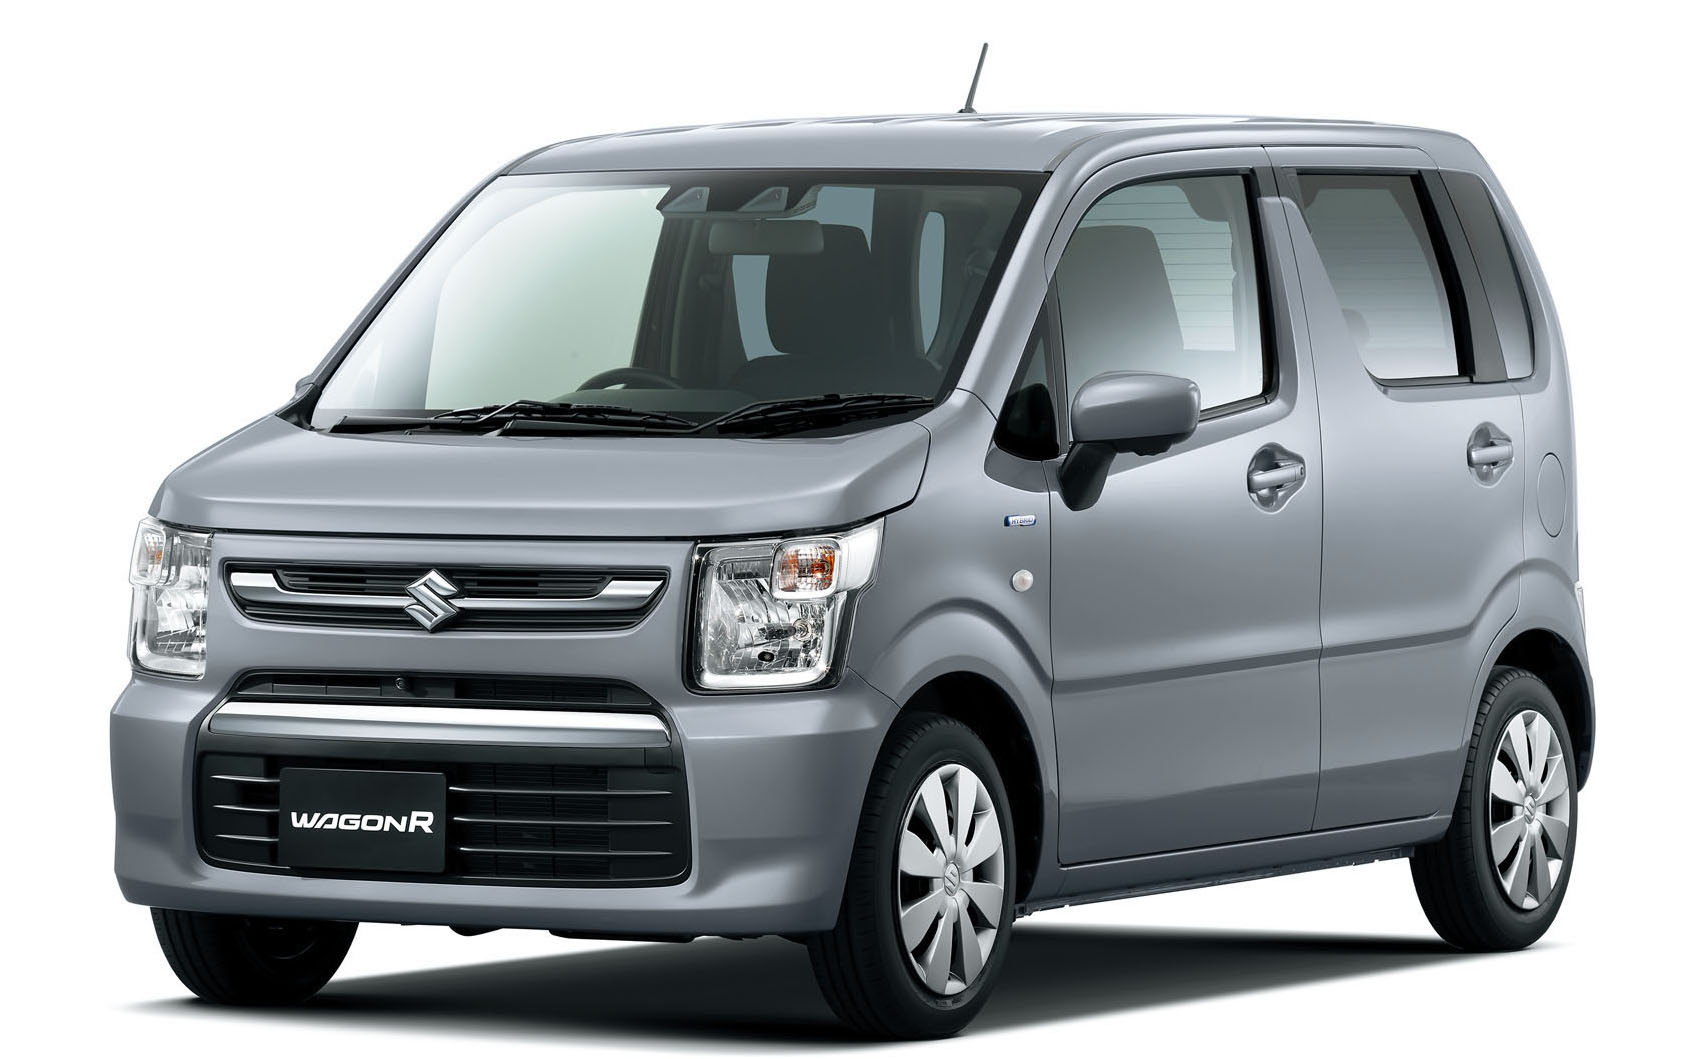 New Suzuki Wagon R Hybrid FX-S: Pricing and Specification Changes Announced